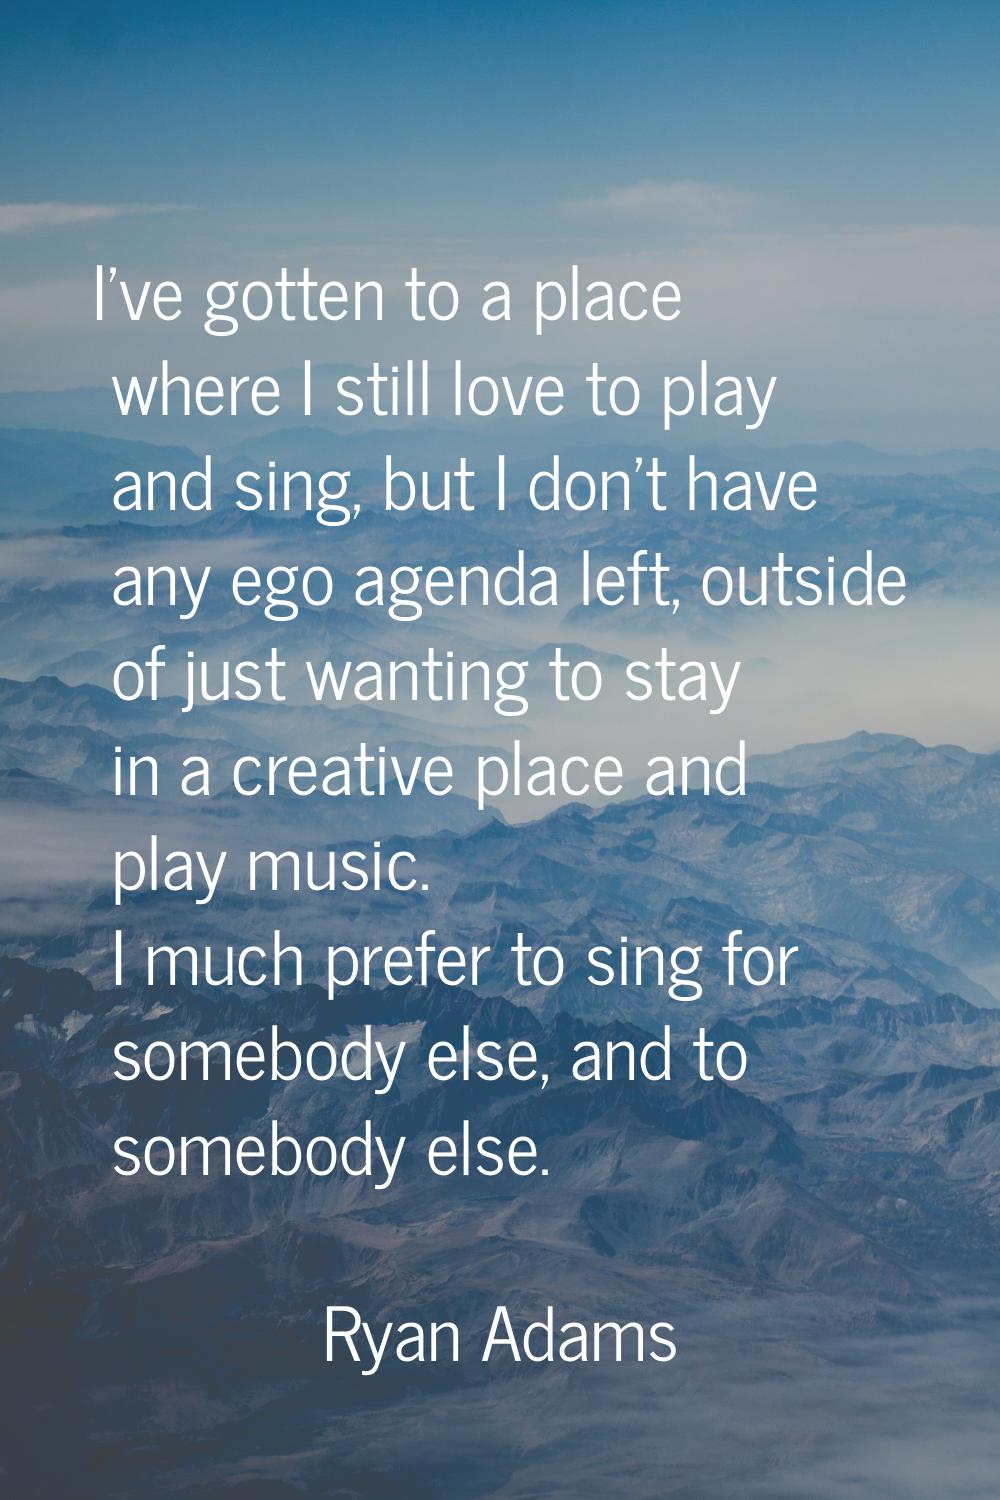 I've gotten to a place where I still love to play and sing, but I don't have any ego agenda left, o